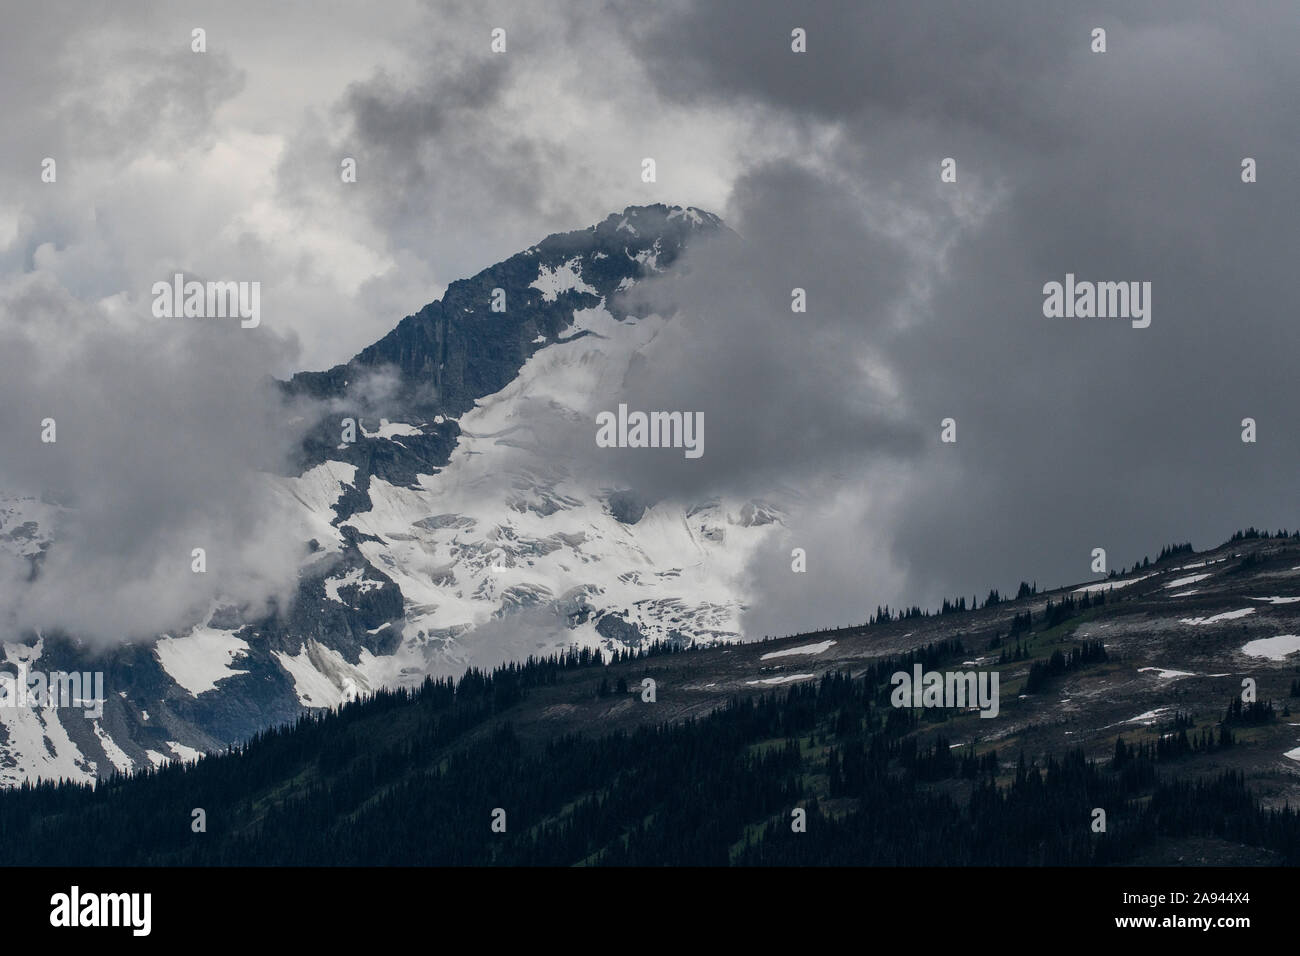 Scenic view of a mountain peak shrouded in clouds on a stormy summer day in British Columbia. Stock Photo